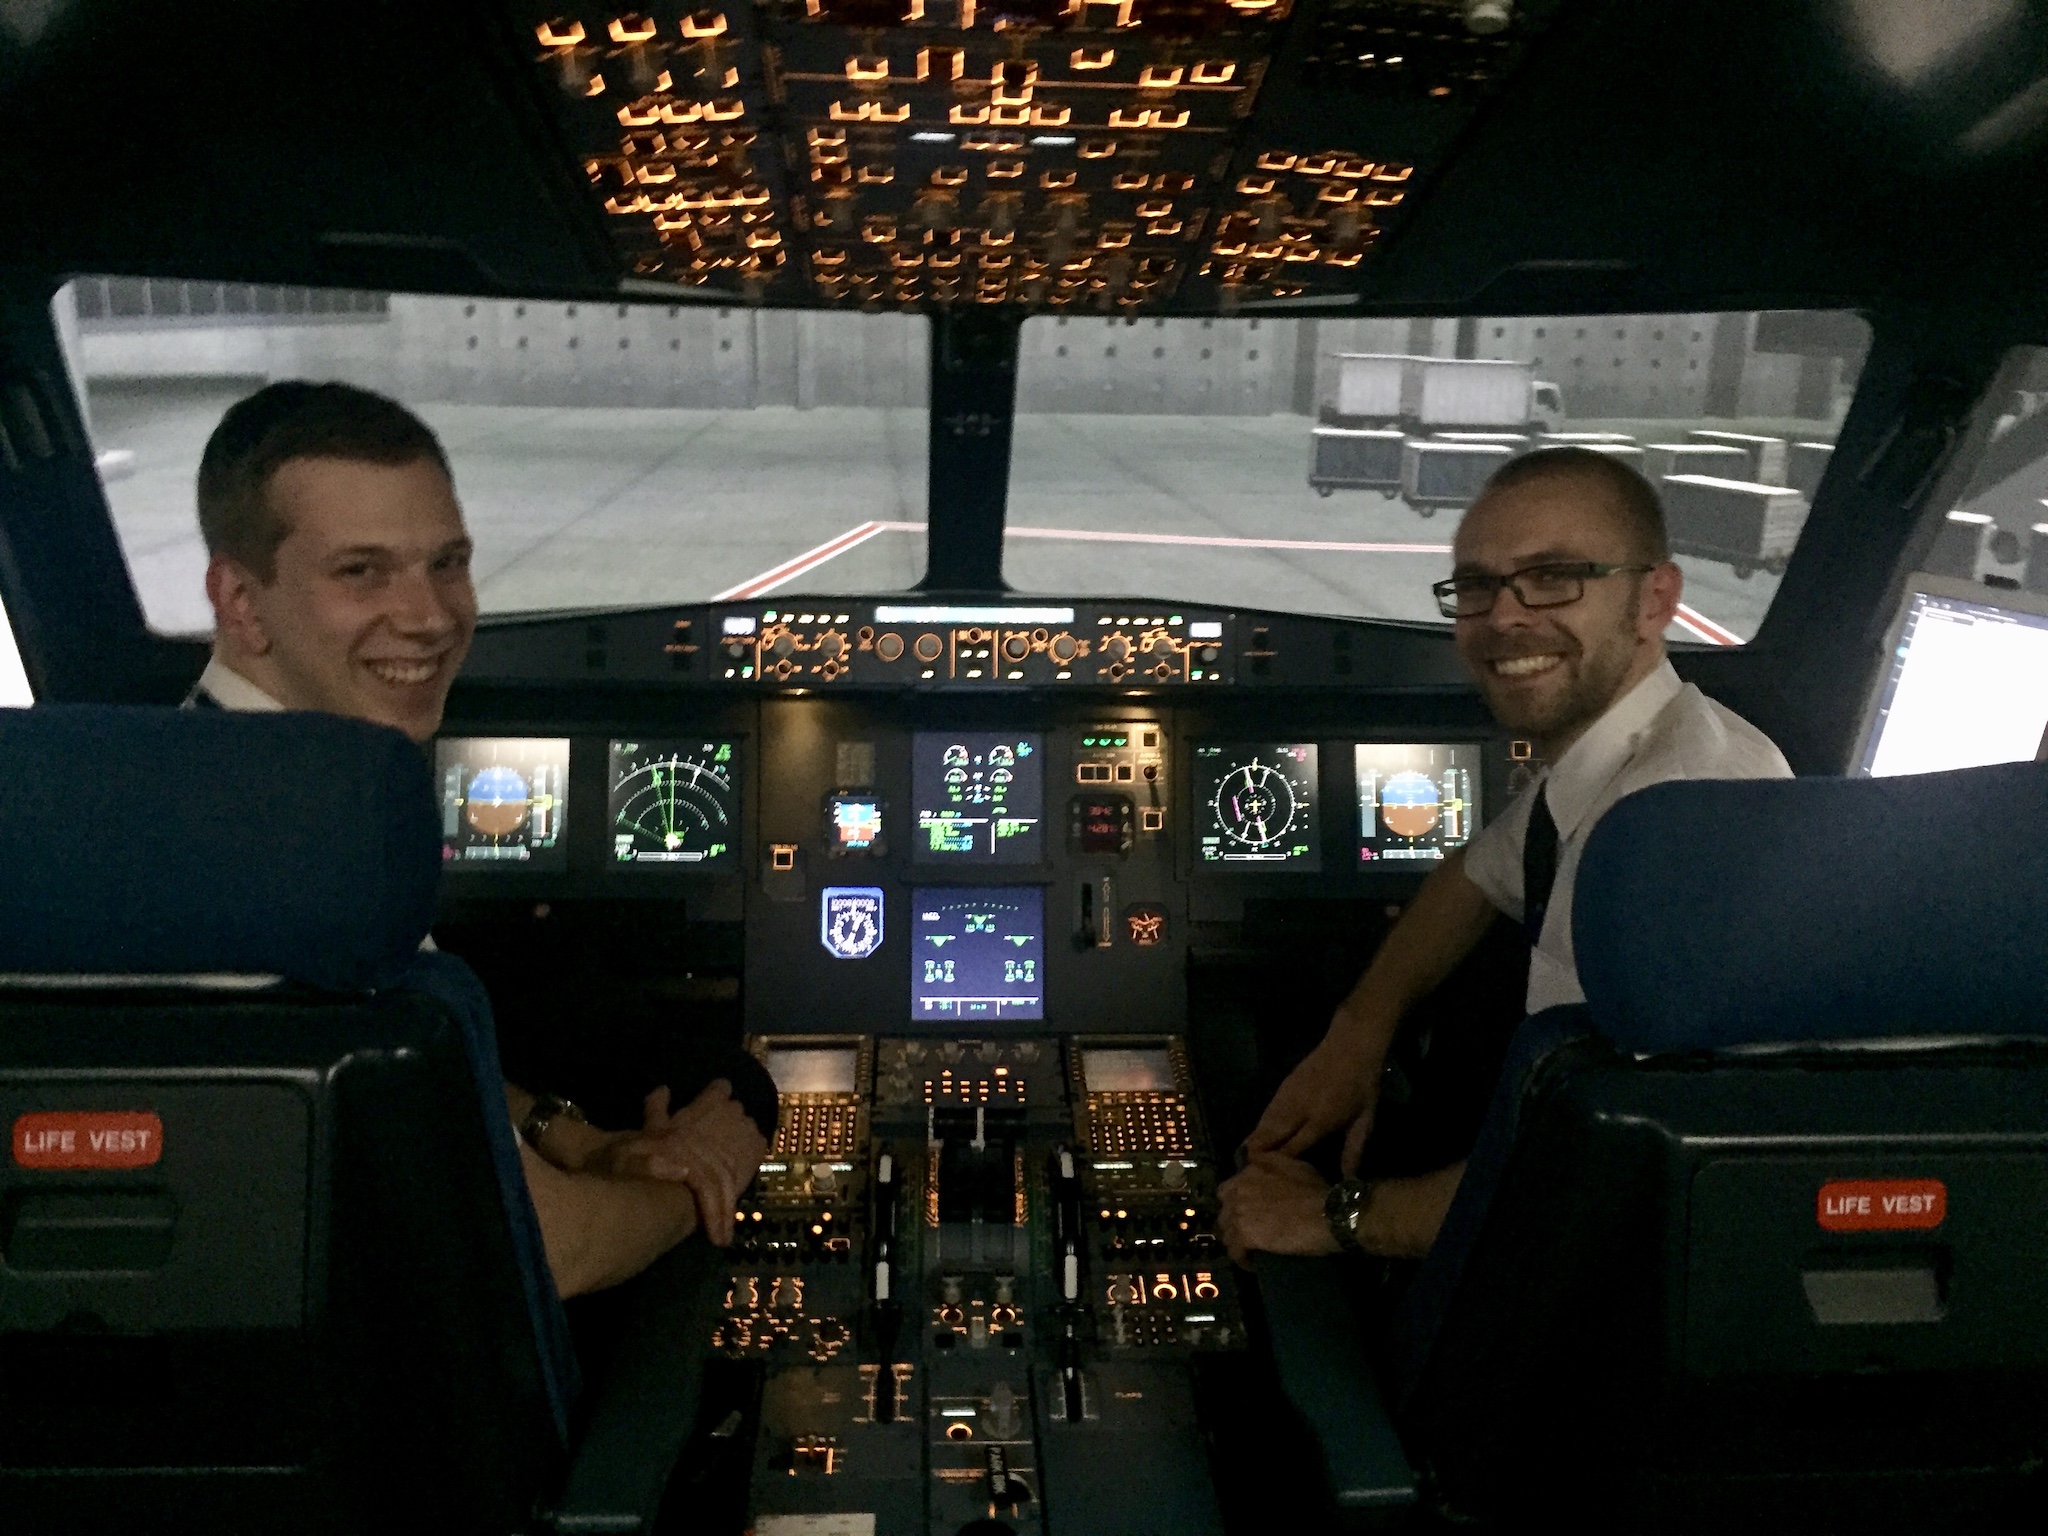 A couple of EPL students smiling at the camera from their seats in the A320 simulator